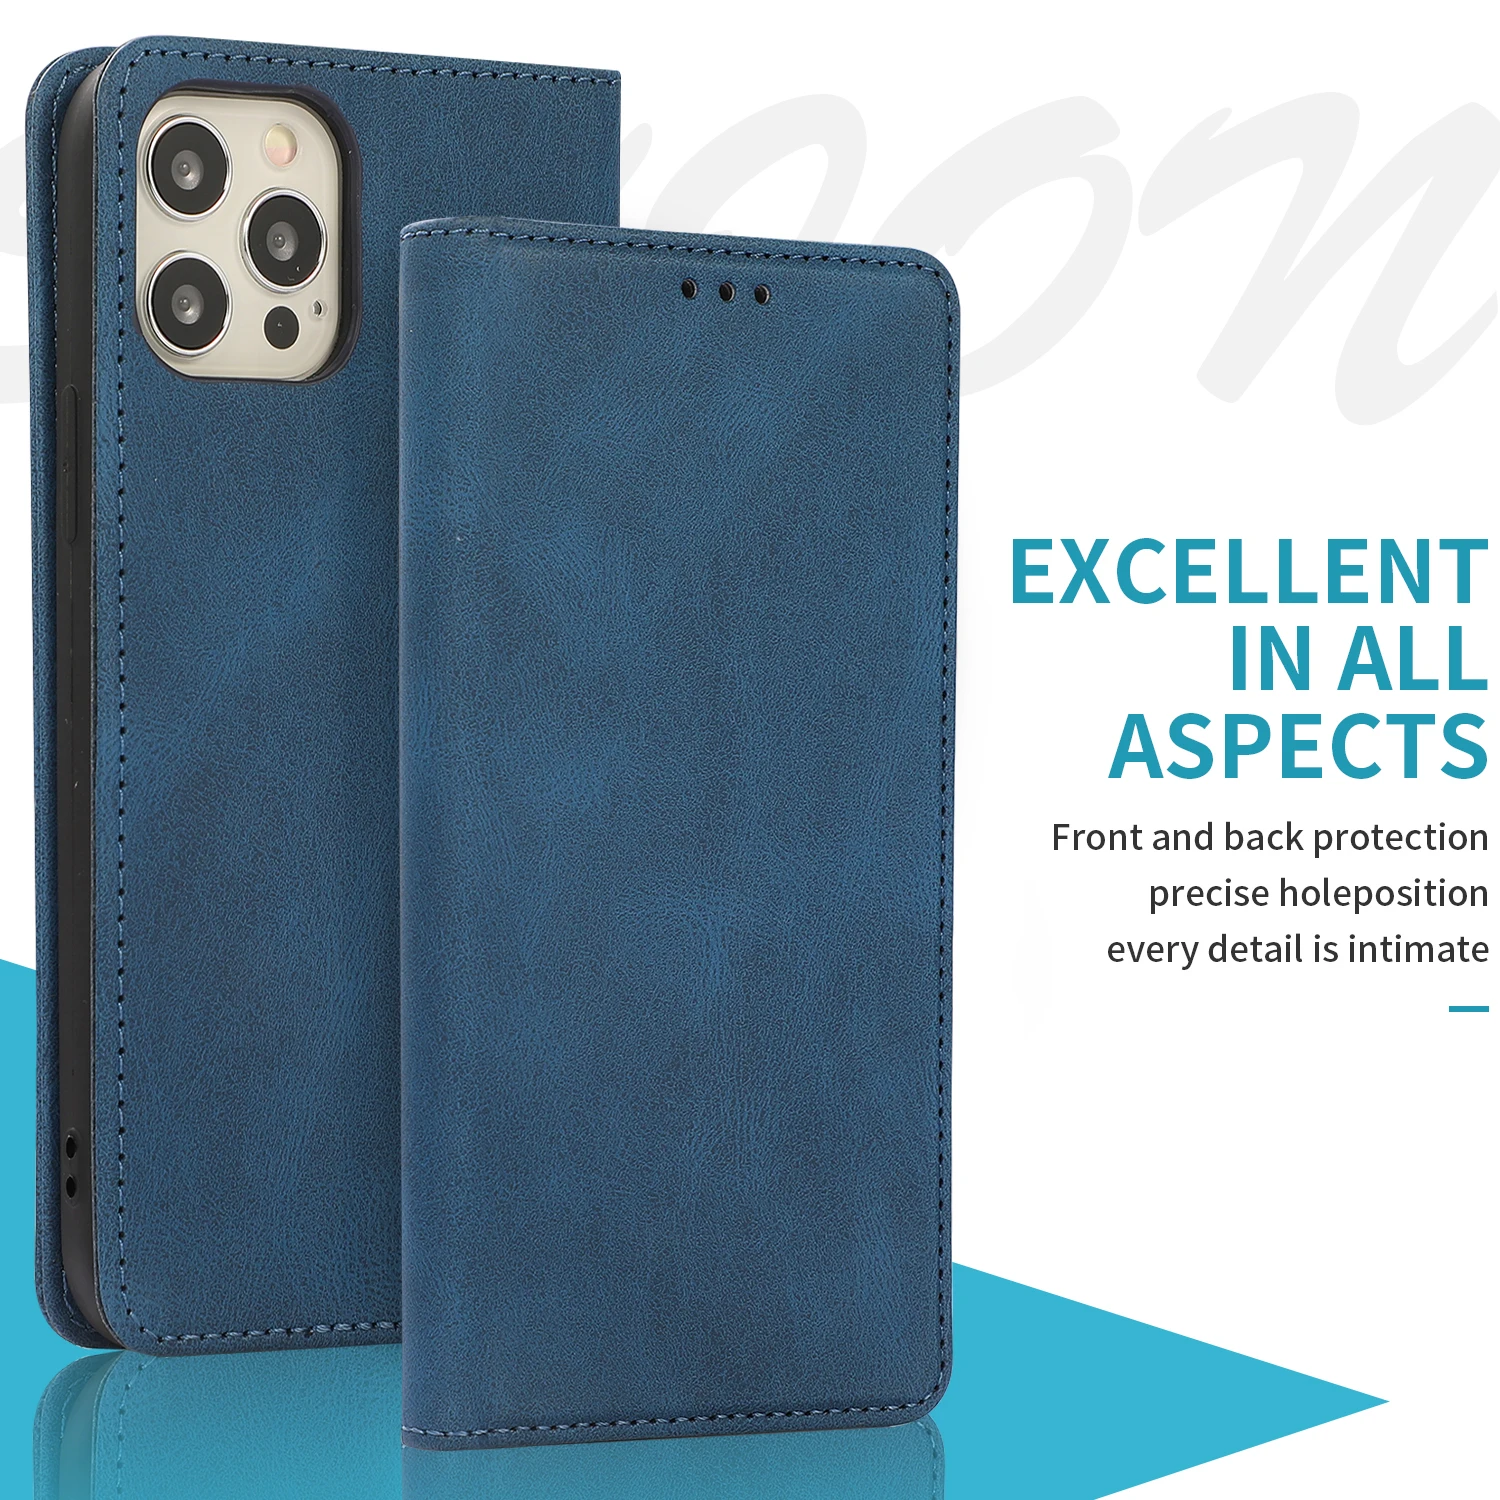 apple 13 pro max case Magnetic FLip Leather Phone Case For iPhone 13 12 11 Pro Max 12Mini Mobile Cover 7 8 6 6s Plus SE 2020 Stand Coque Wallet Funda best iphone 13 pro max case iPhone 13 Pro Max